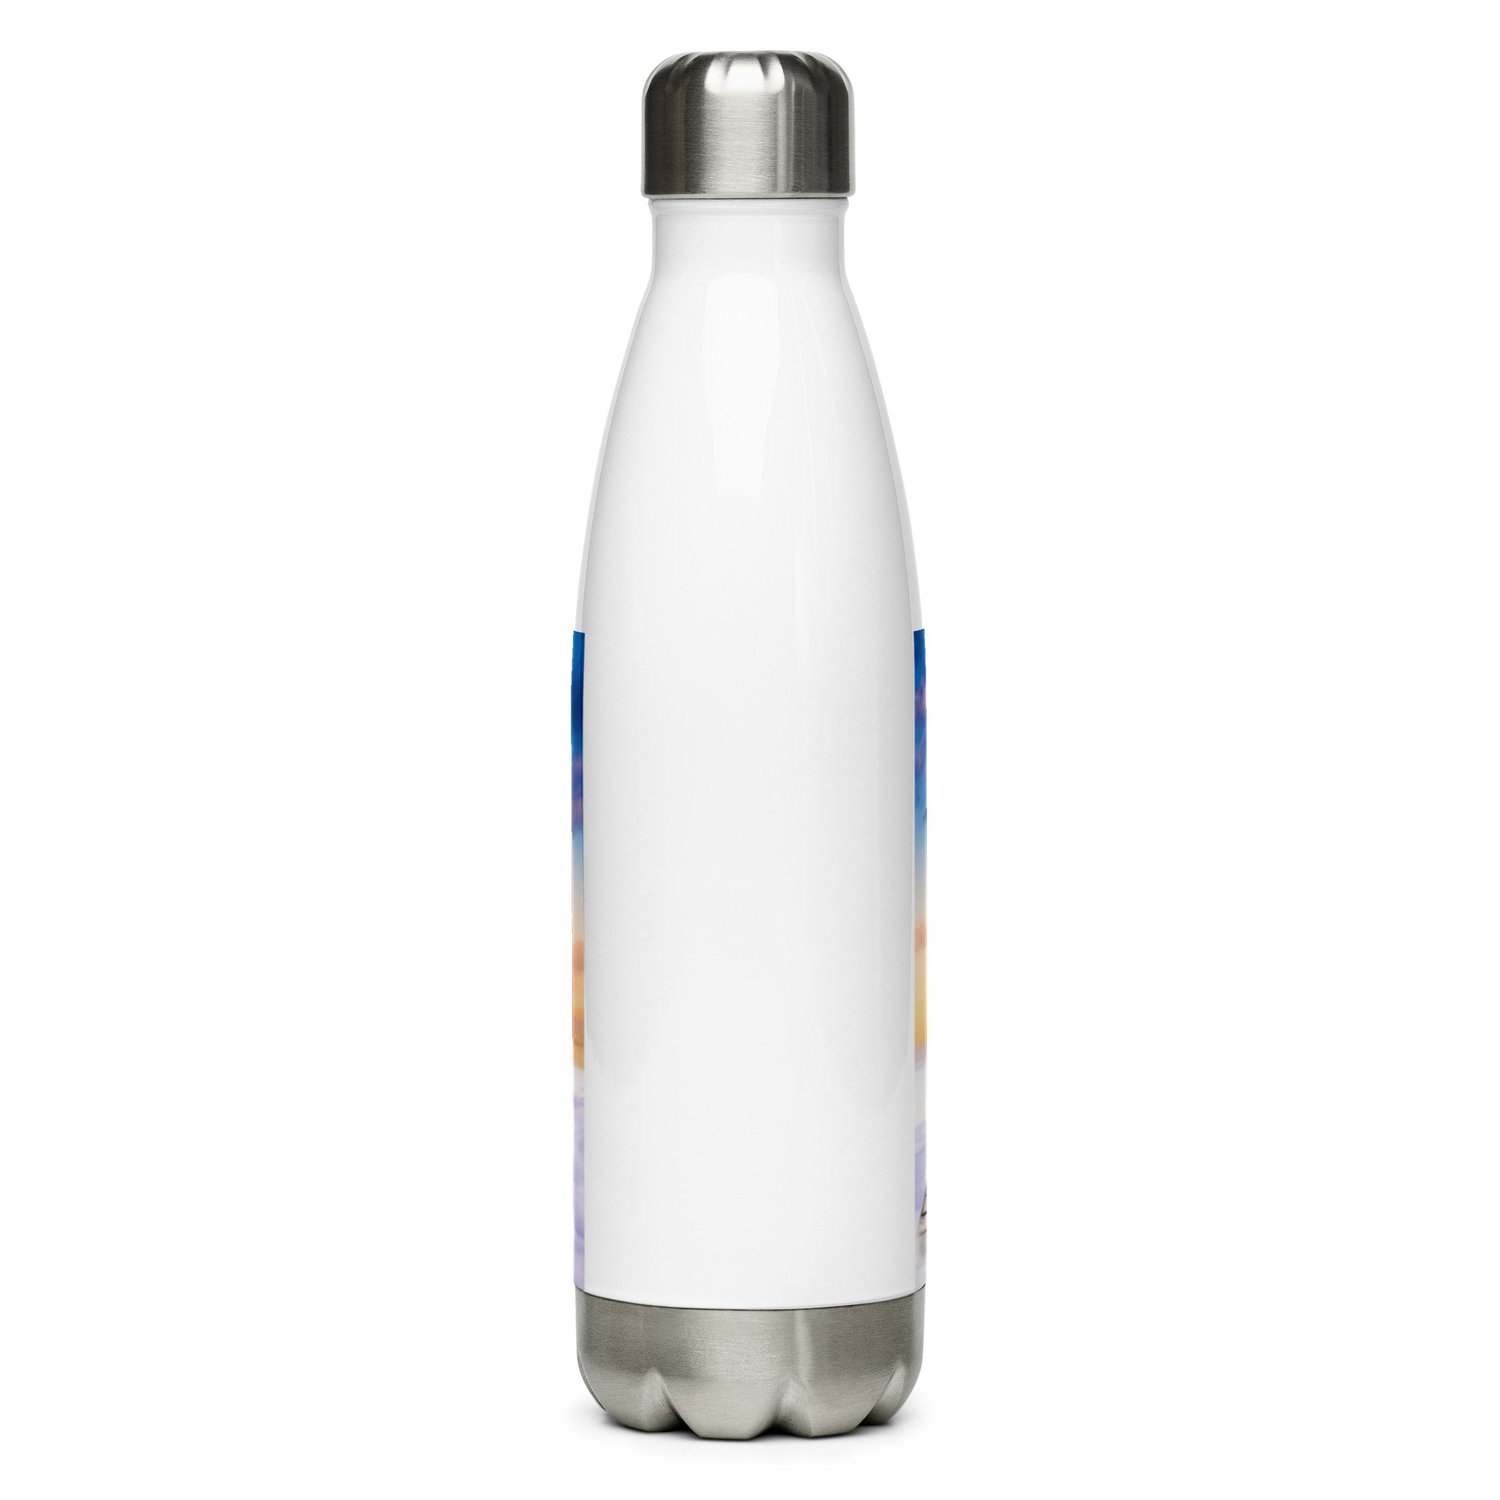 https://images.squarespace-cdn.com/content/v1/62827ac700bed8633fa08fb2/1654199770267-1OZXH7M1FBY1E7B65MU2/stainless-steel-water-bottle-white-17oz-back-629915cca7b5f.jpg?format=1500w